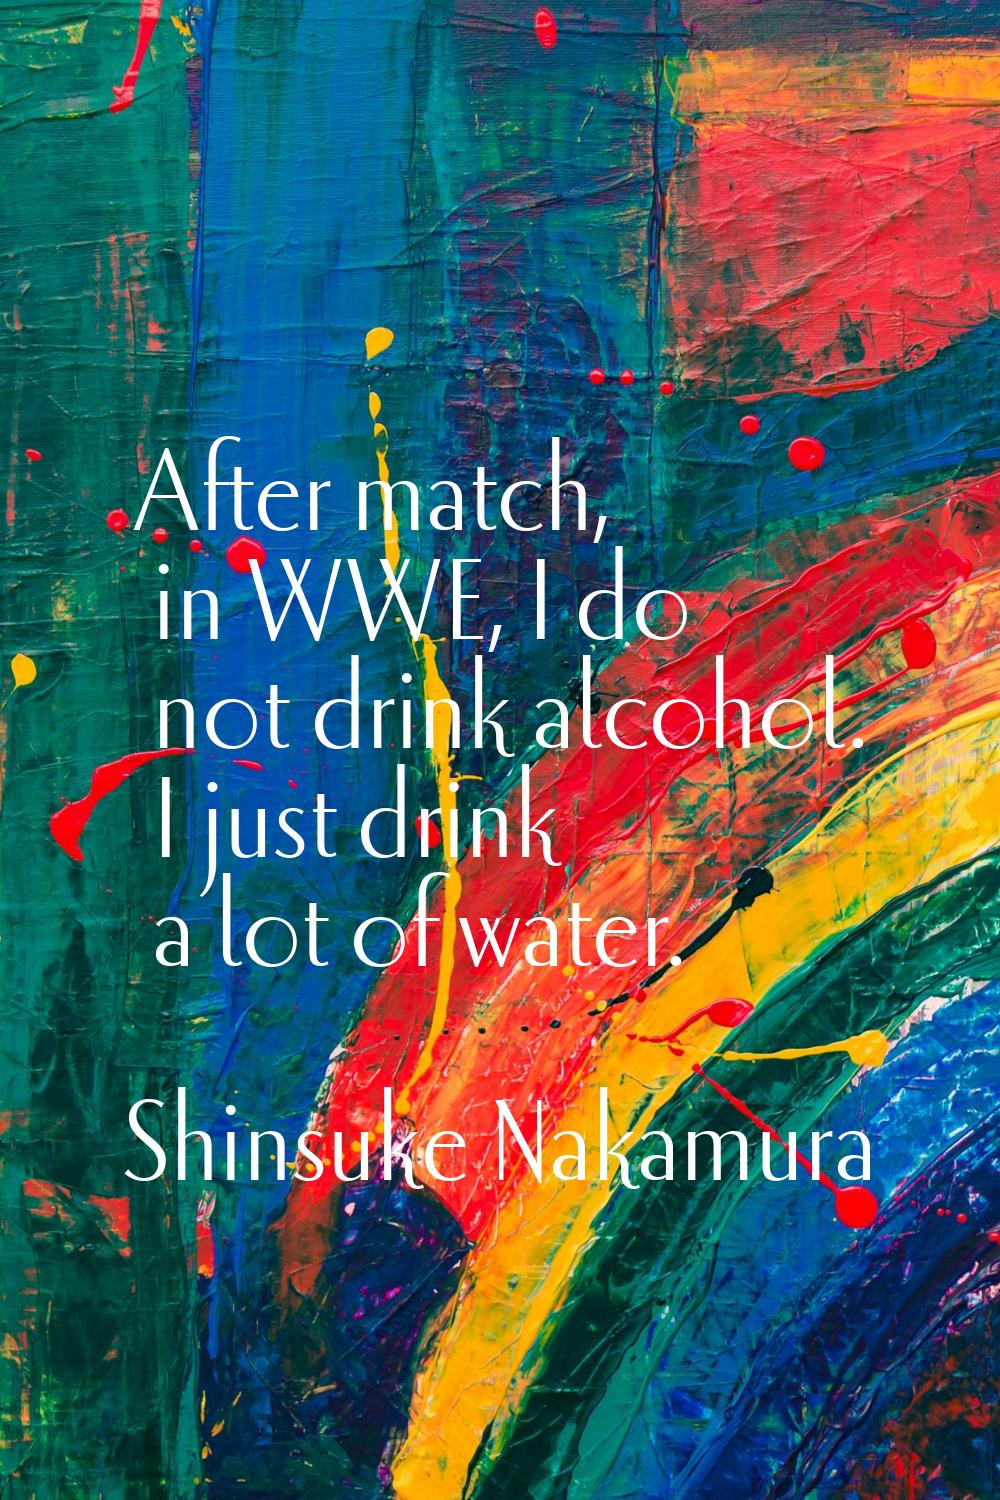 After match, in WWE, I do not drink alcohol. I just drink a lot of water.